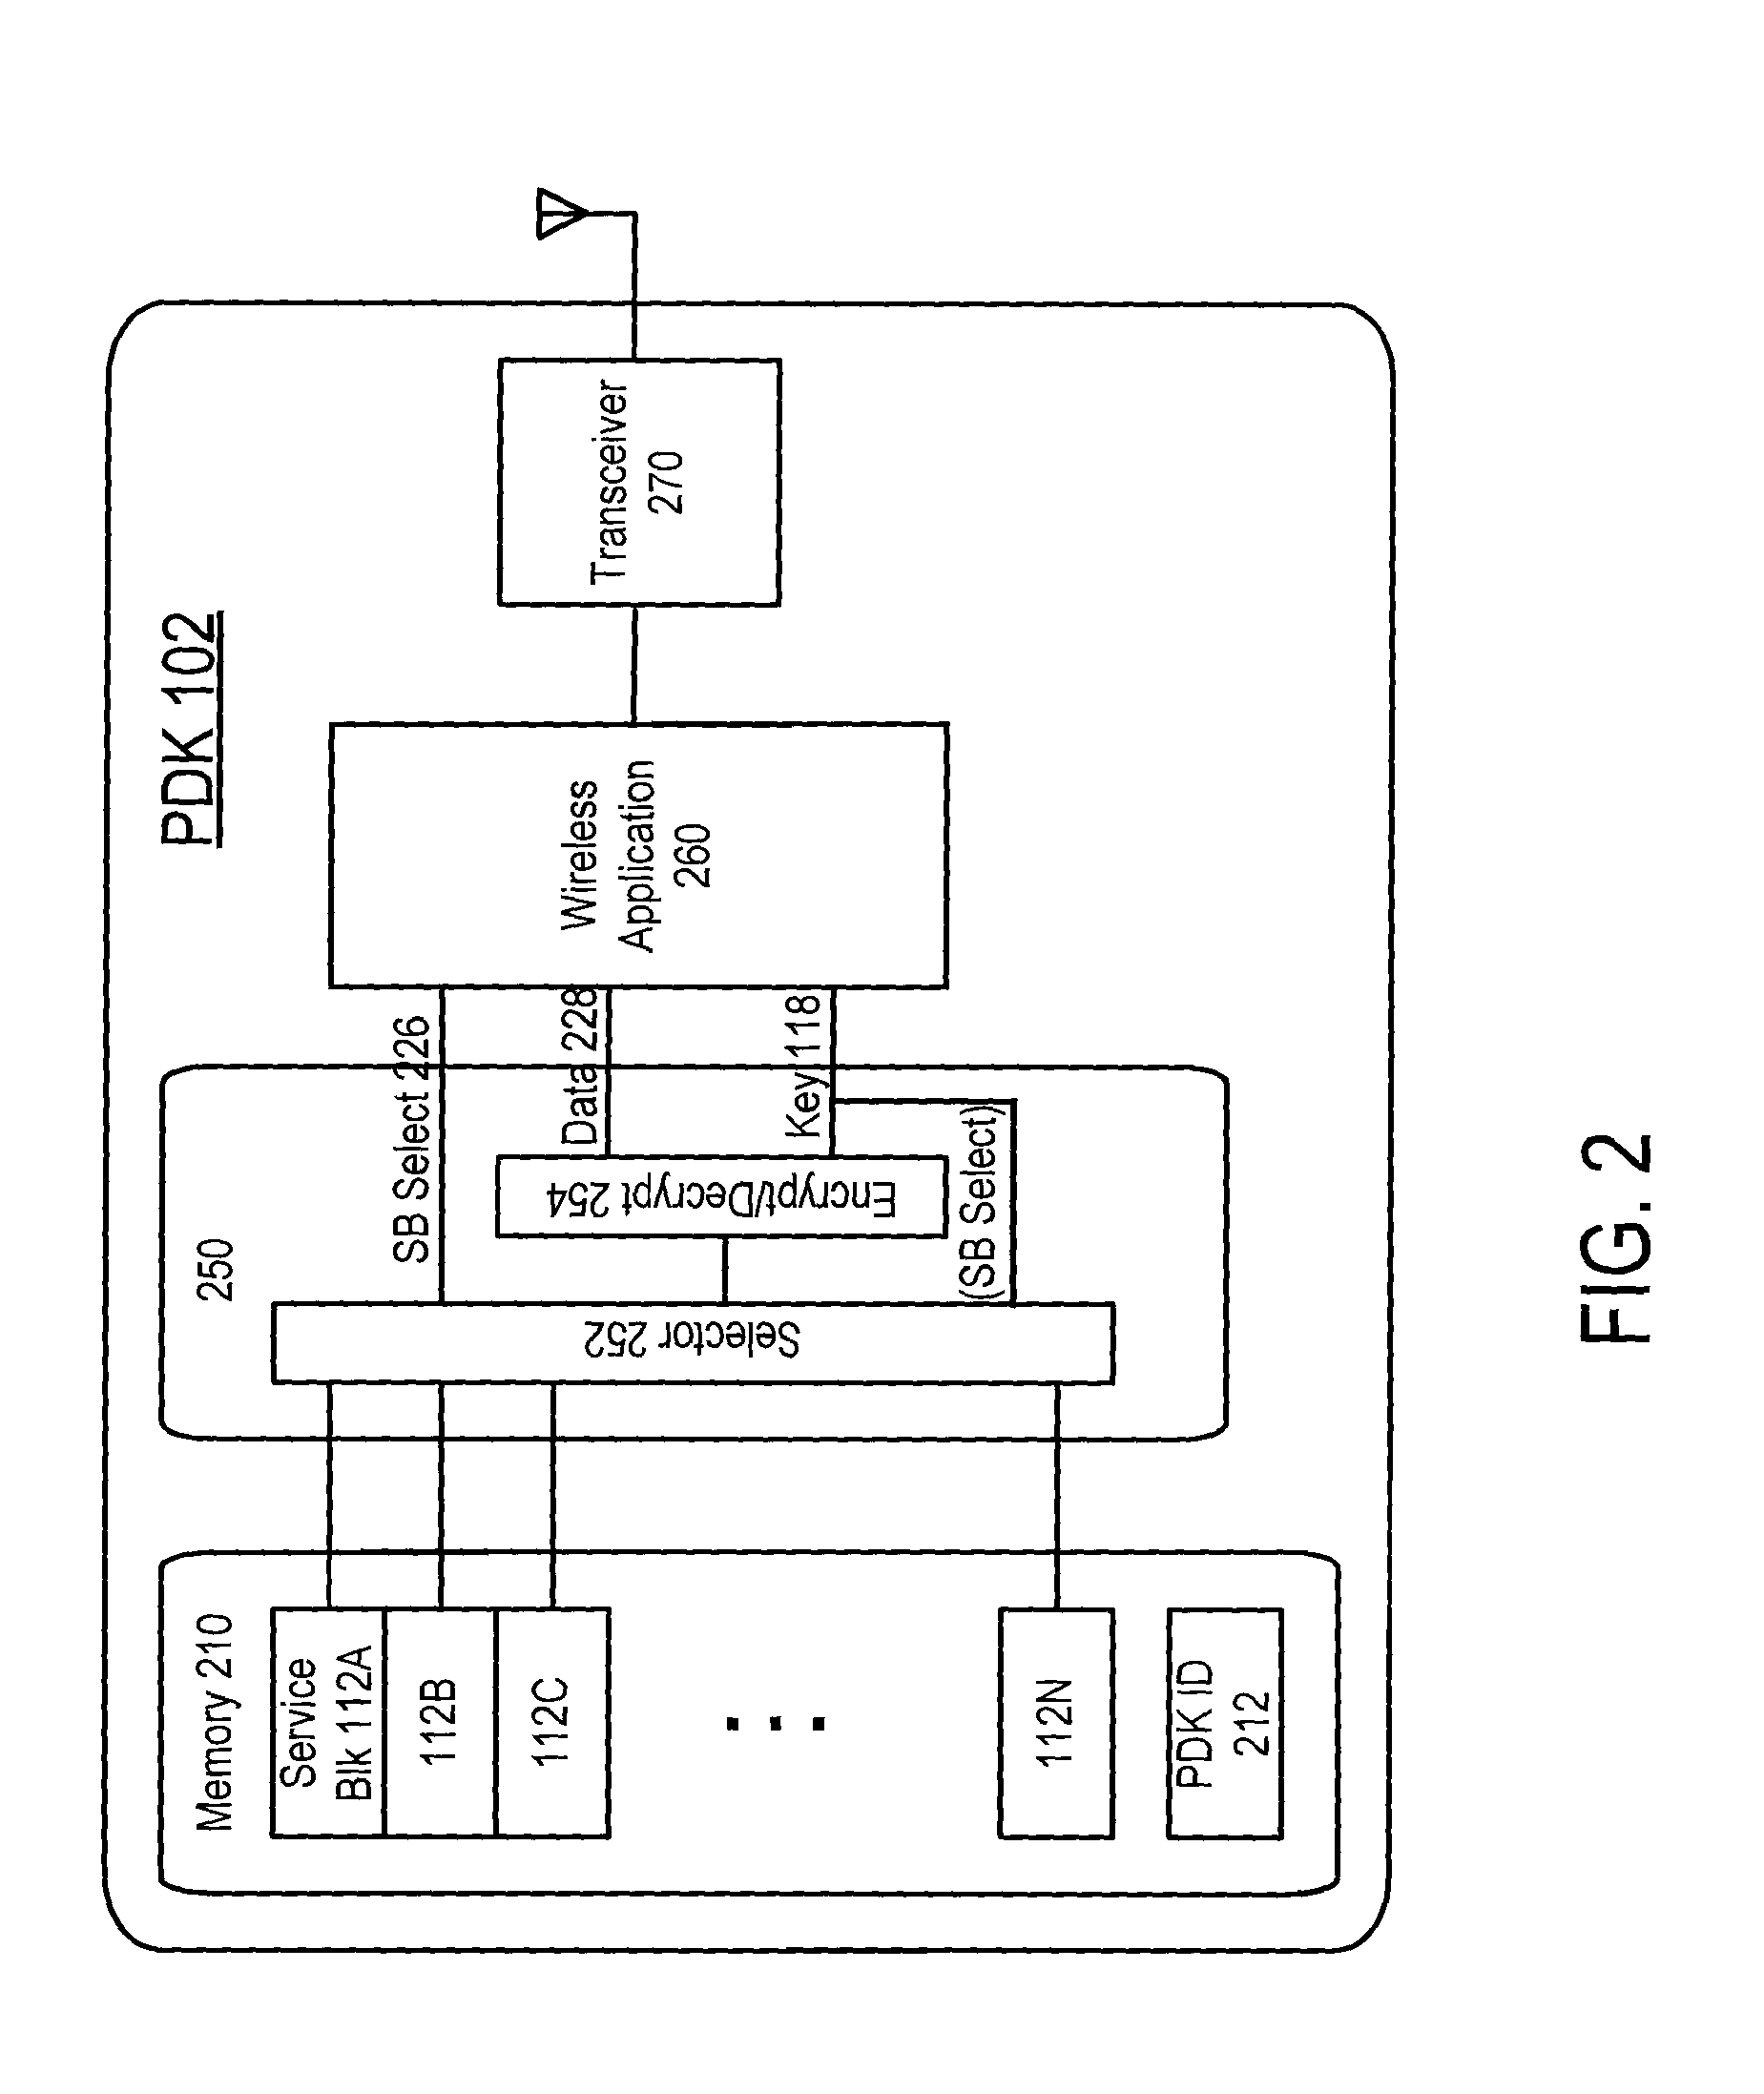 Hybrid device having a personal digital key and receiver-decoder circuit and methods of use